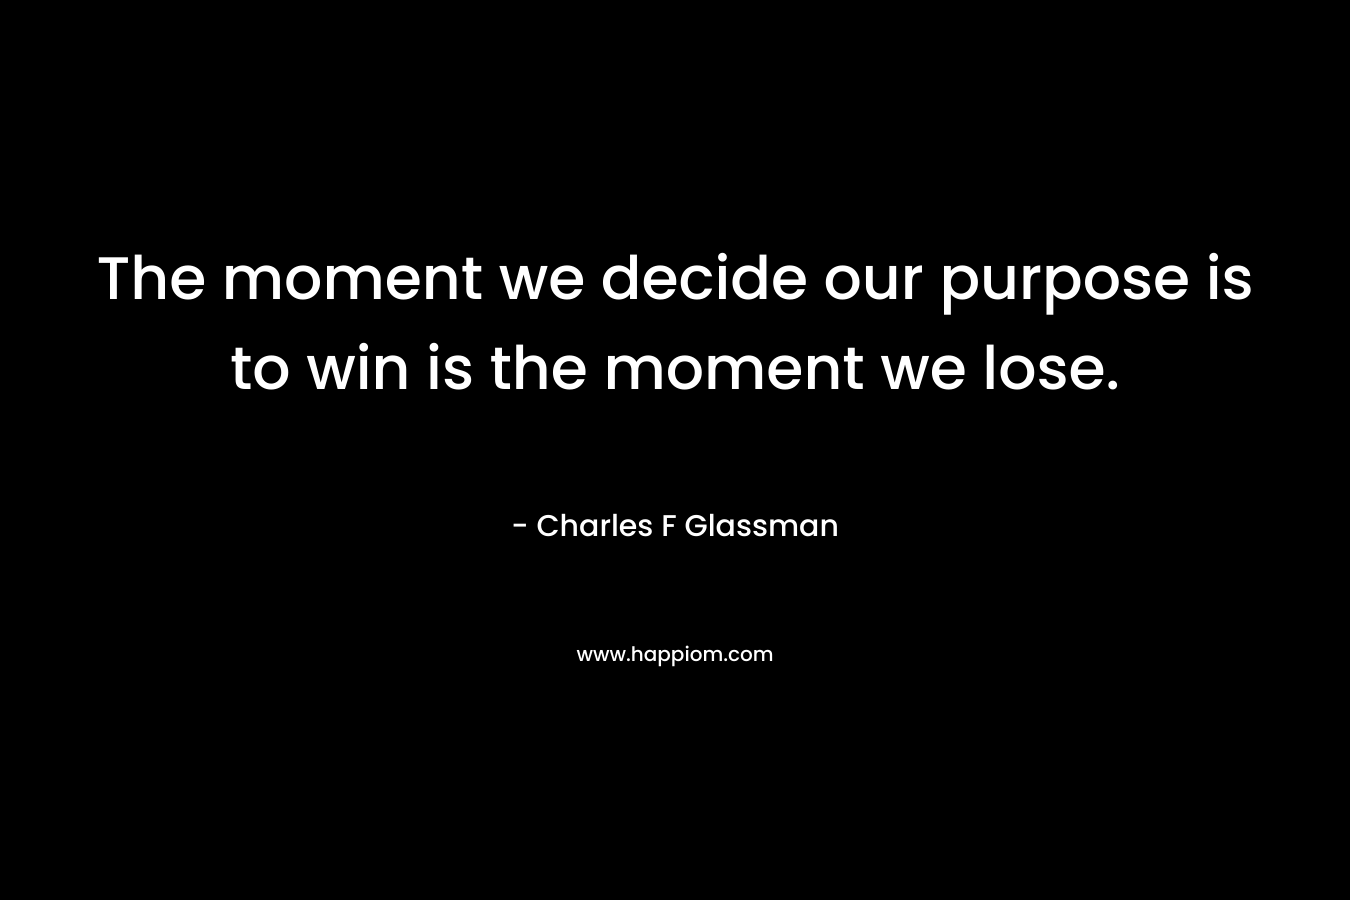 The moment we decide our purpose is to win is the moment we lose.